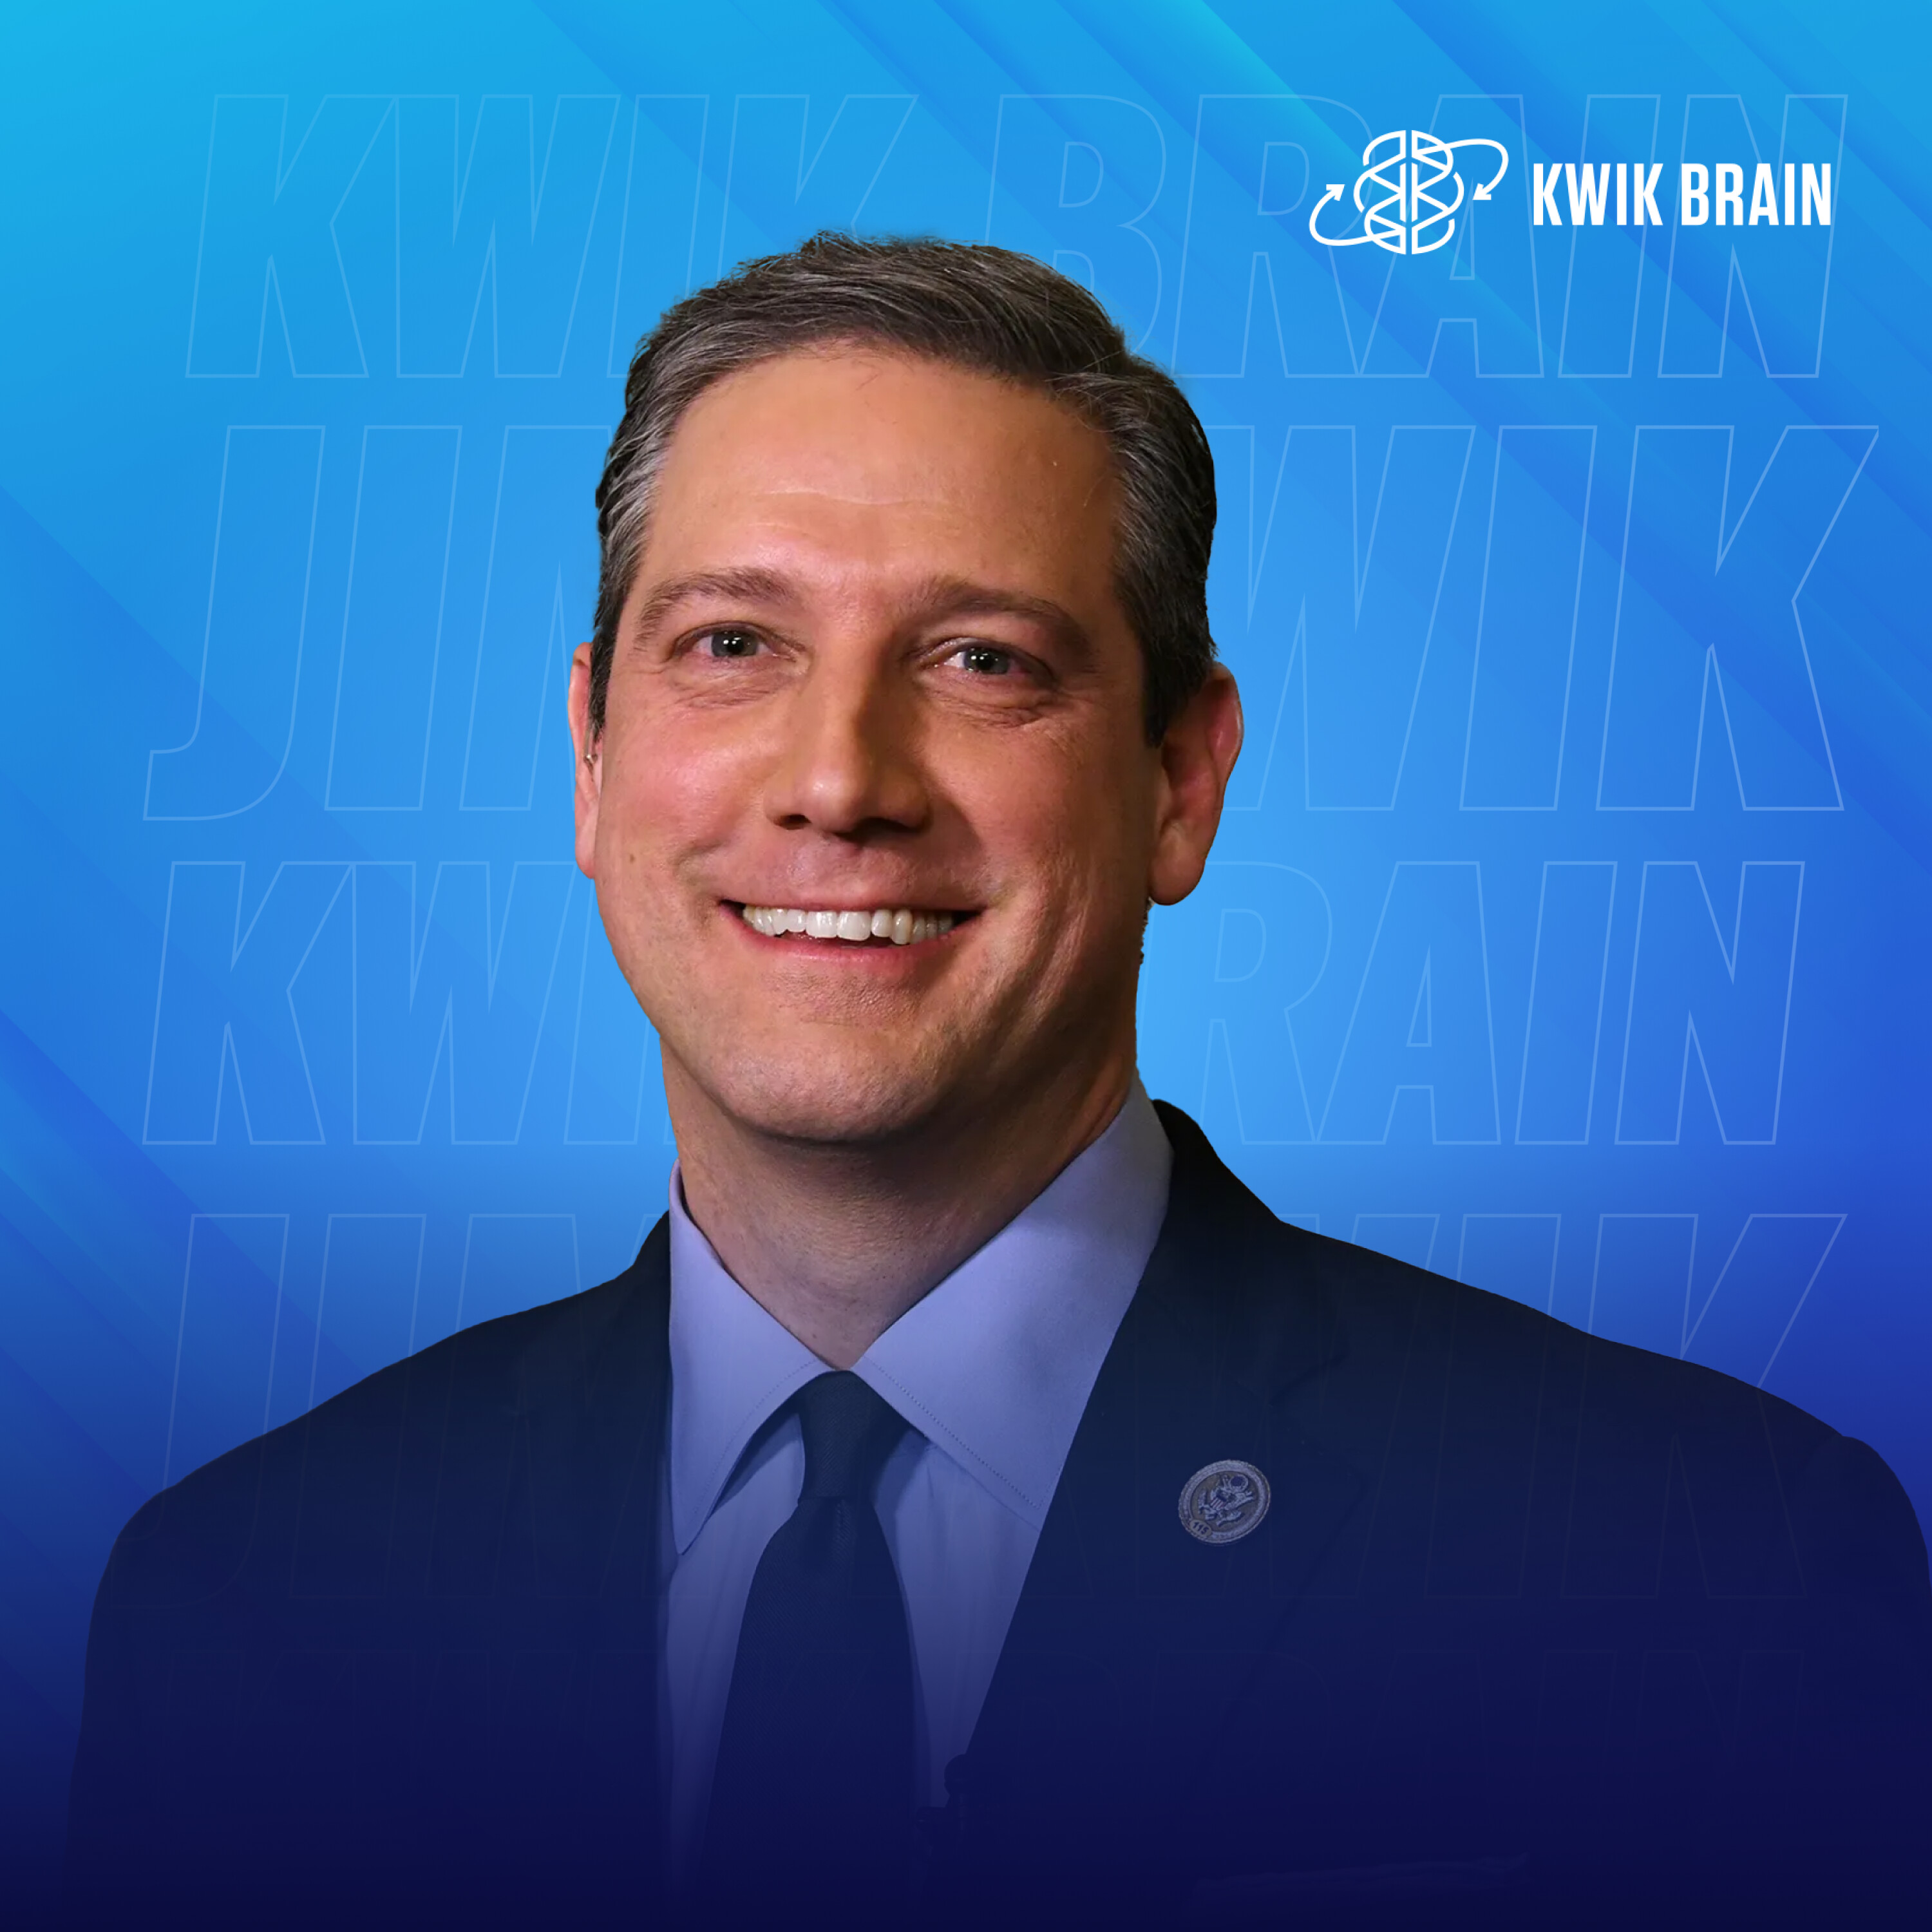 Mindful Leadership with Presidential Candidate - Tim Ryan